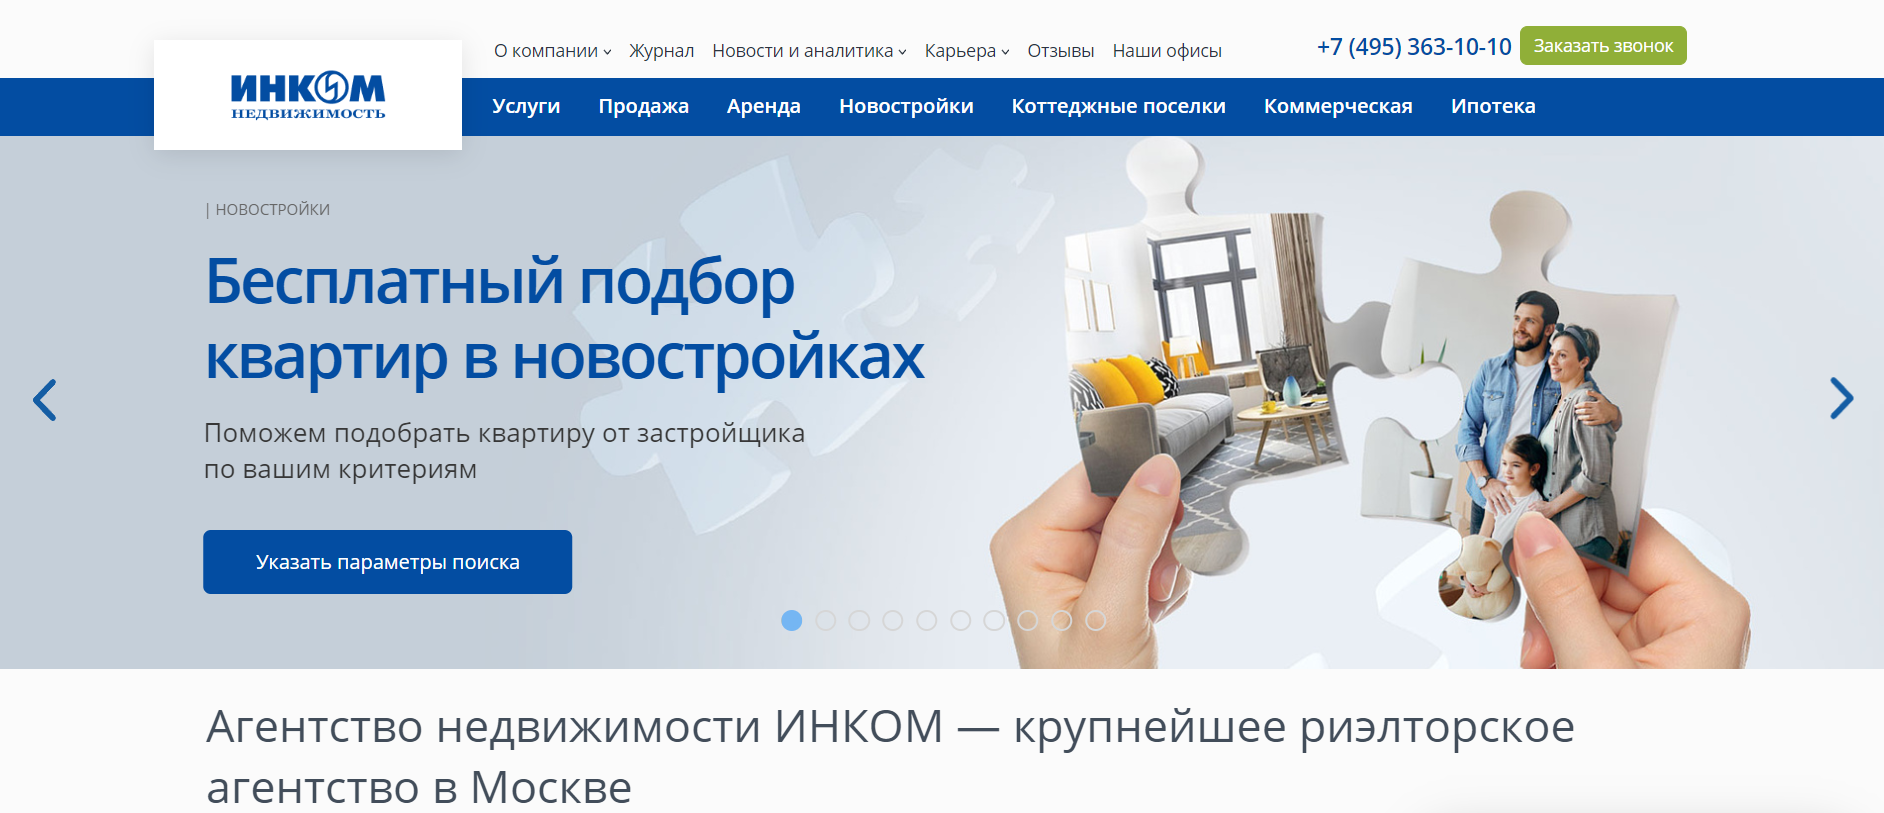 INKOM-Real Estate in Moscow: Our Negative Experience